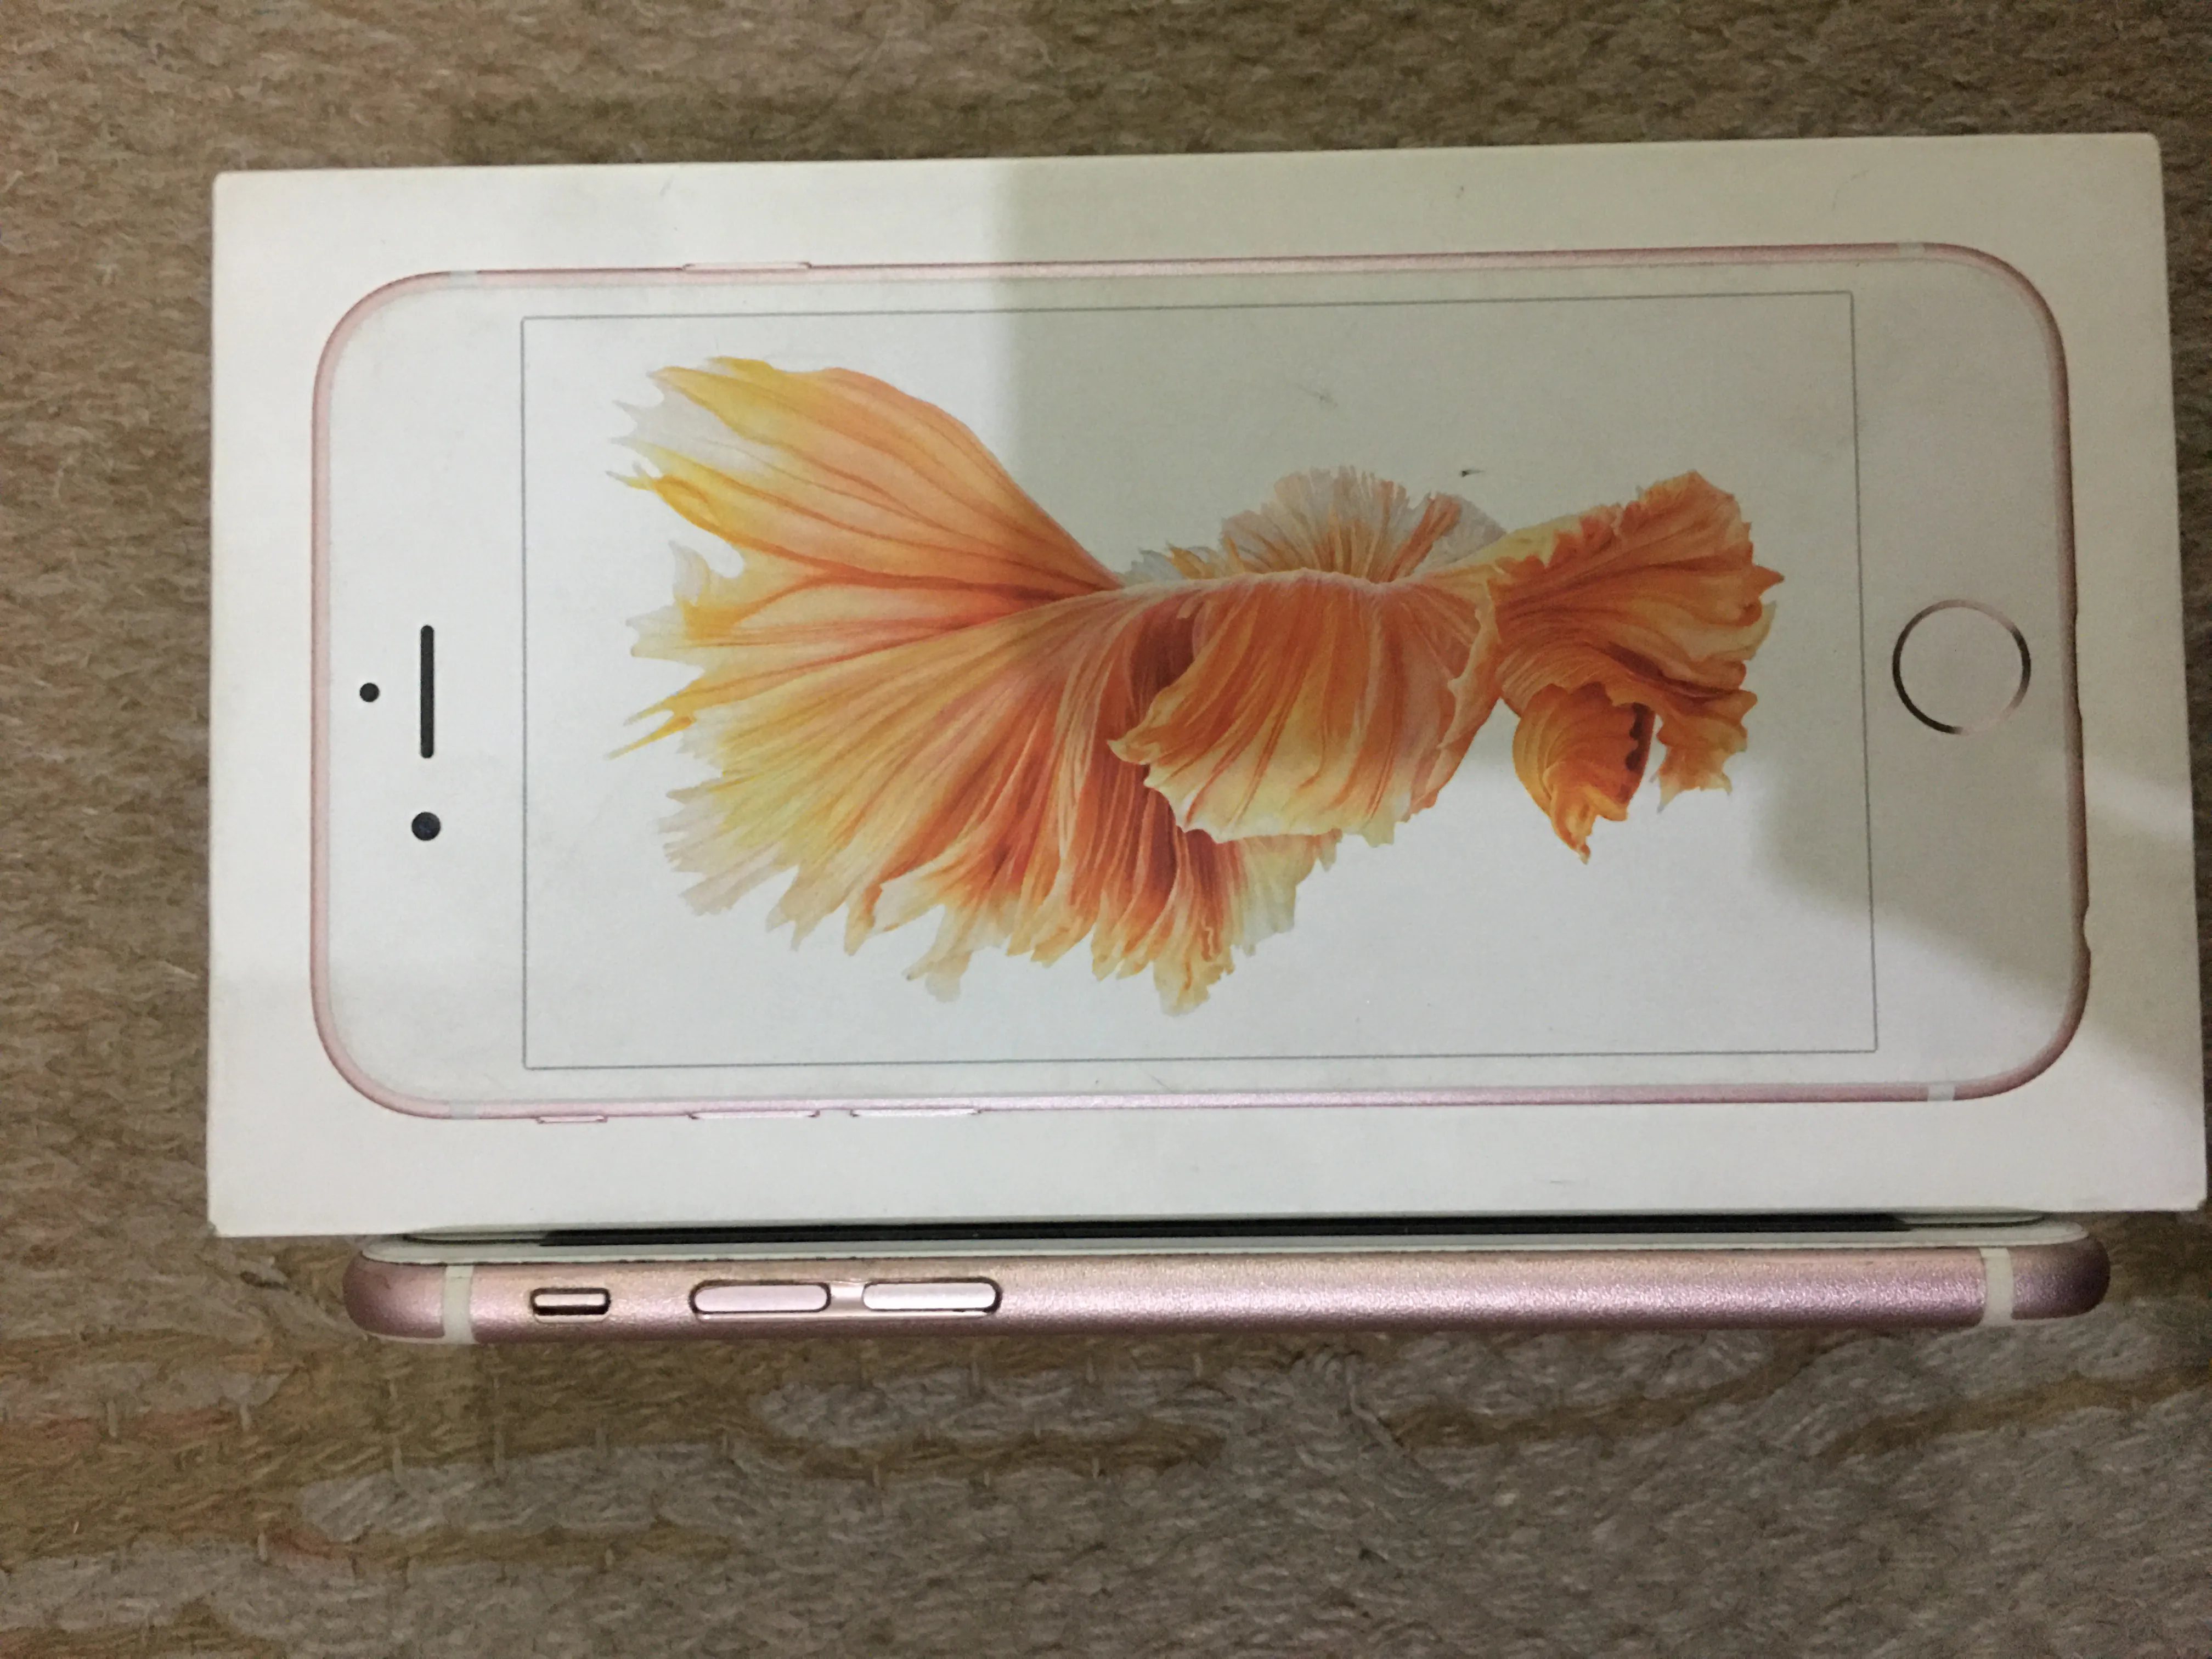 Iphone 6s Rose Gold 10/10 (16 GB) for sale - photo 2